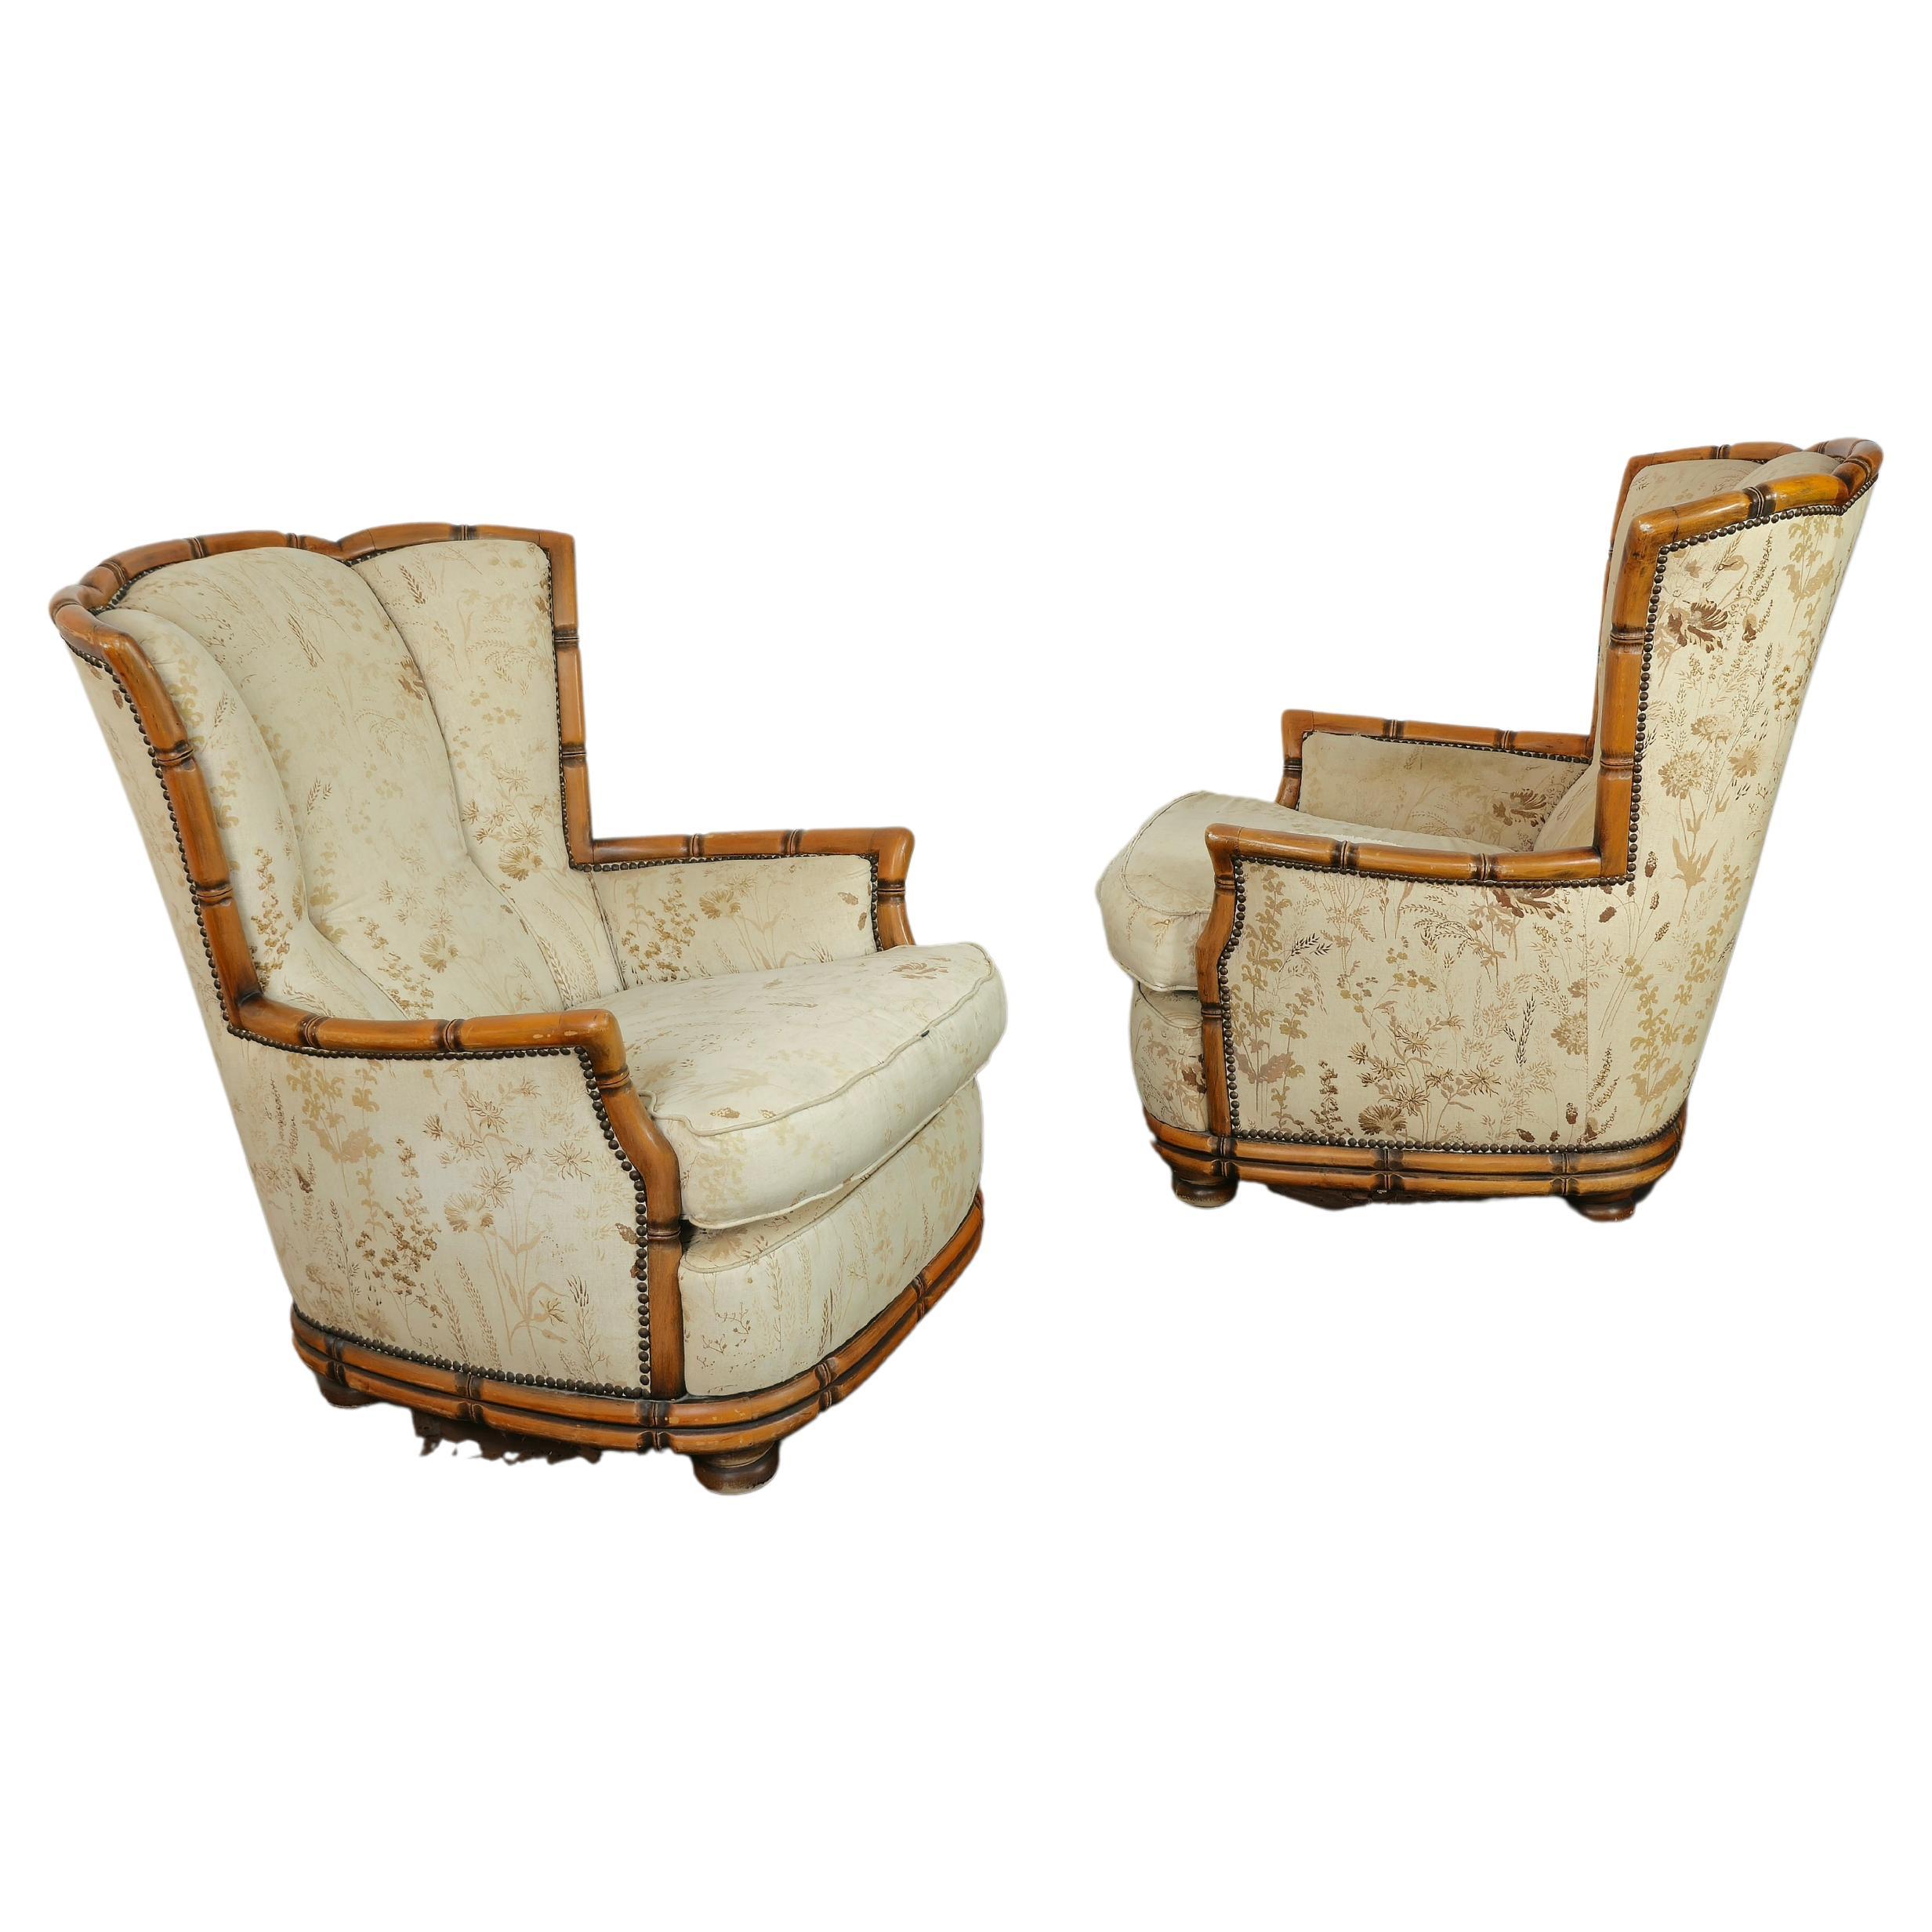 Pair of Armchairs Wood Fabric Giorgetti Midcentury Modern Italian Design 1960s For Sale